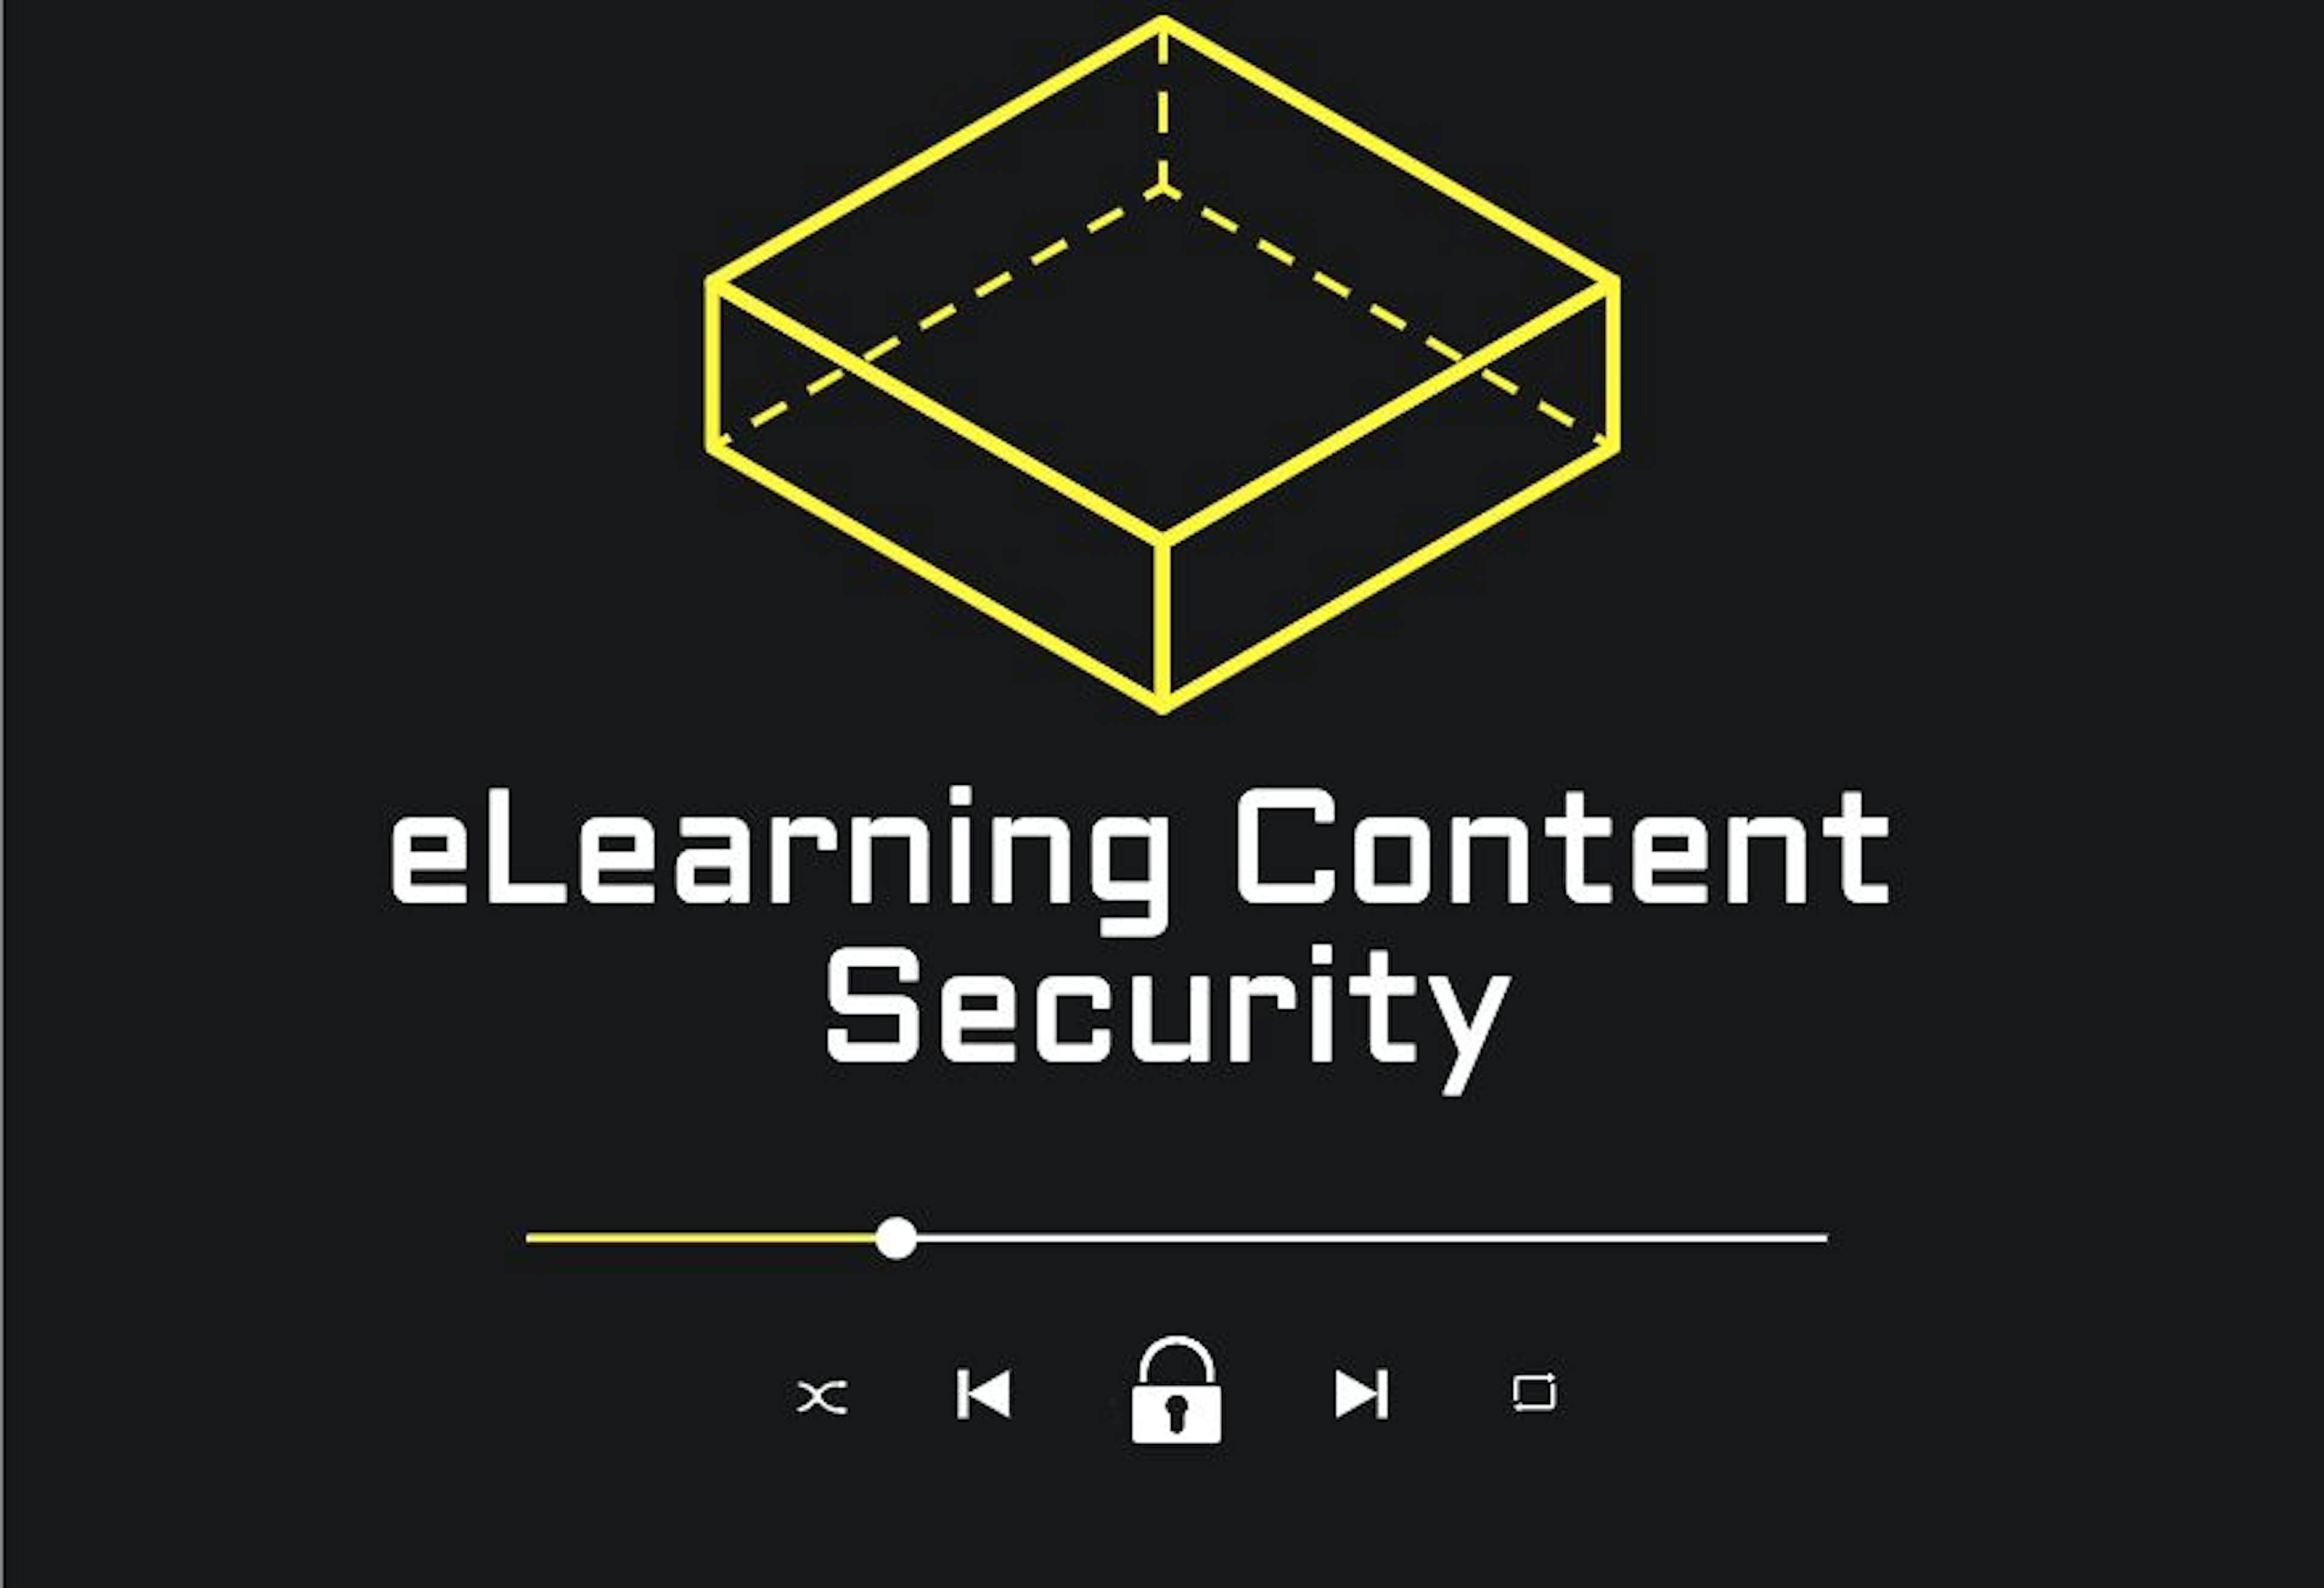 /practices-used-in-elearning-video-content-protection feature image